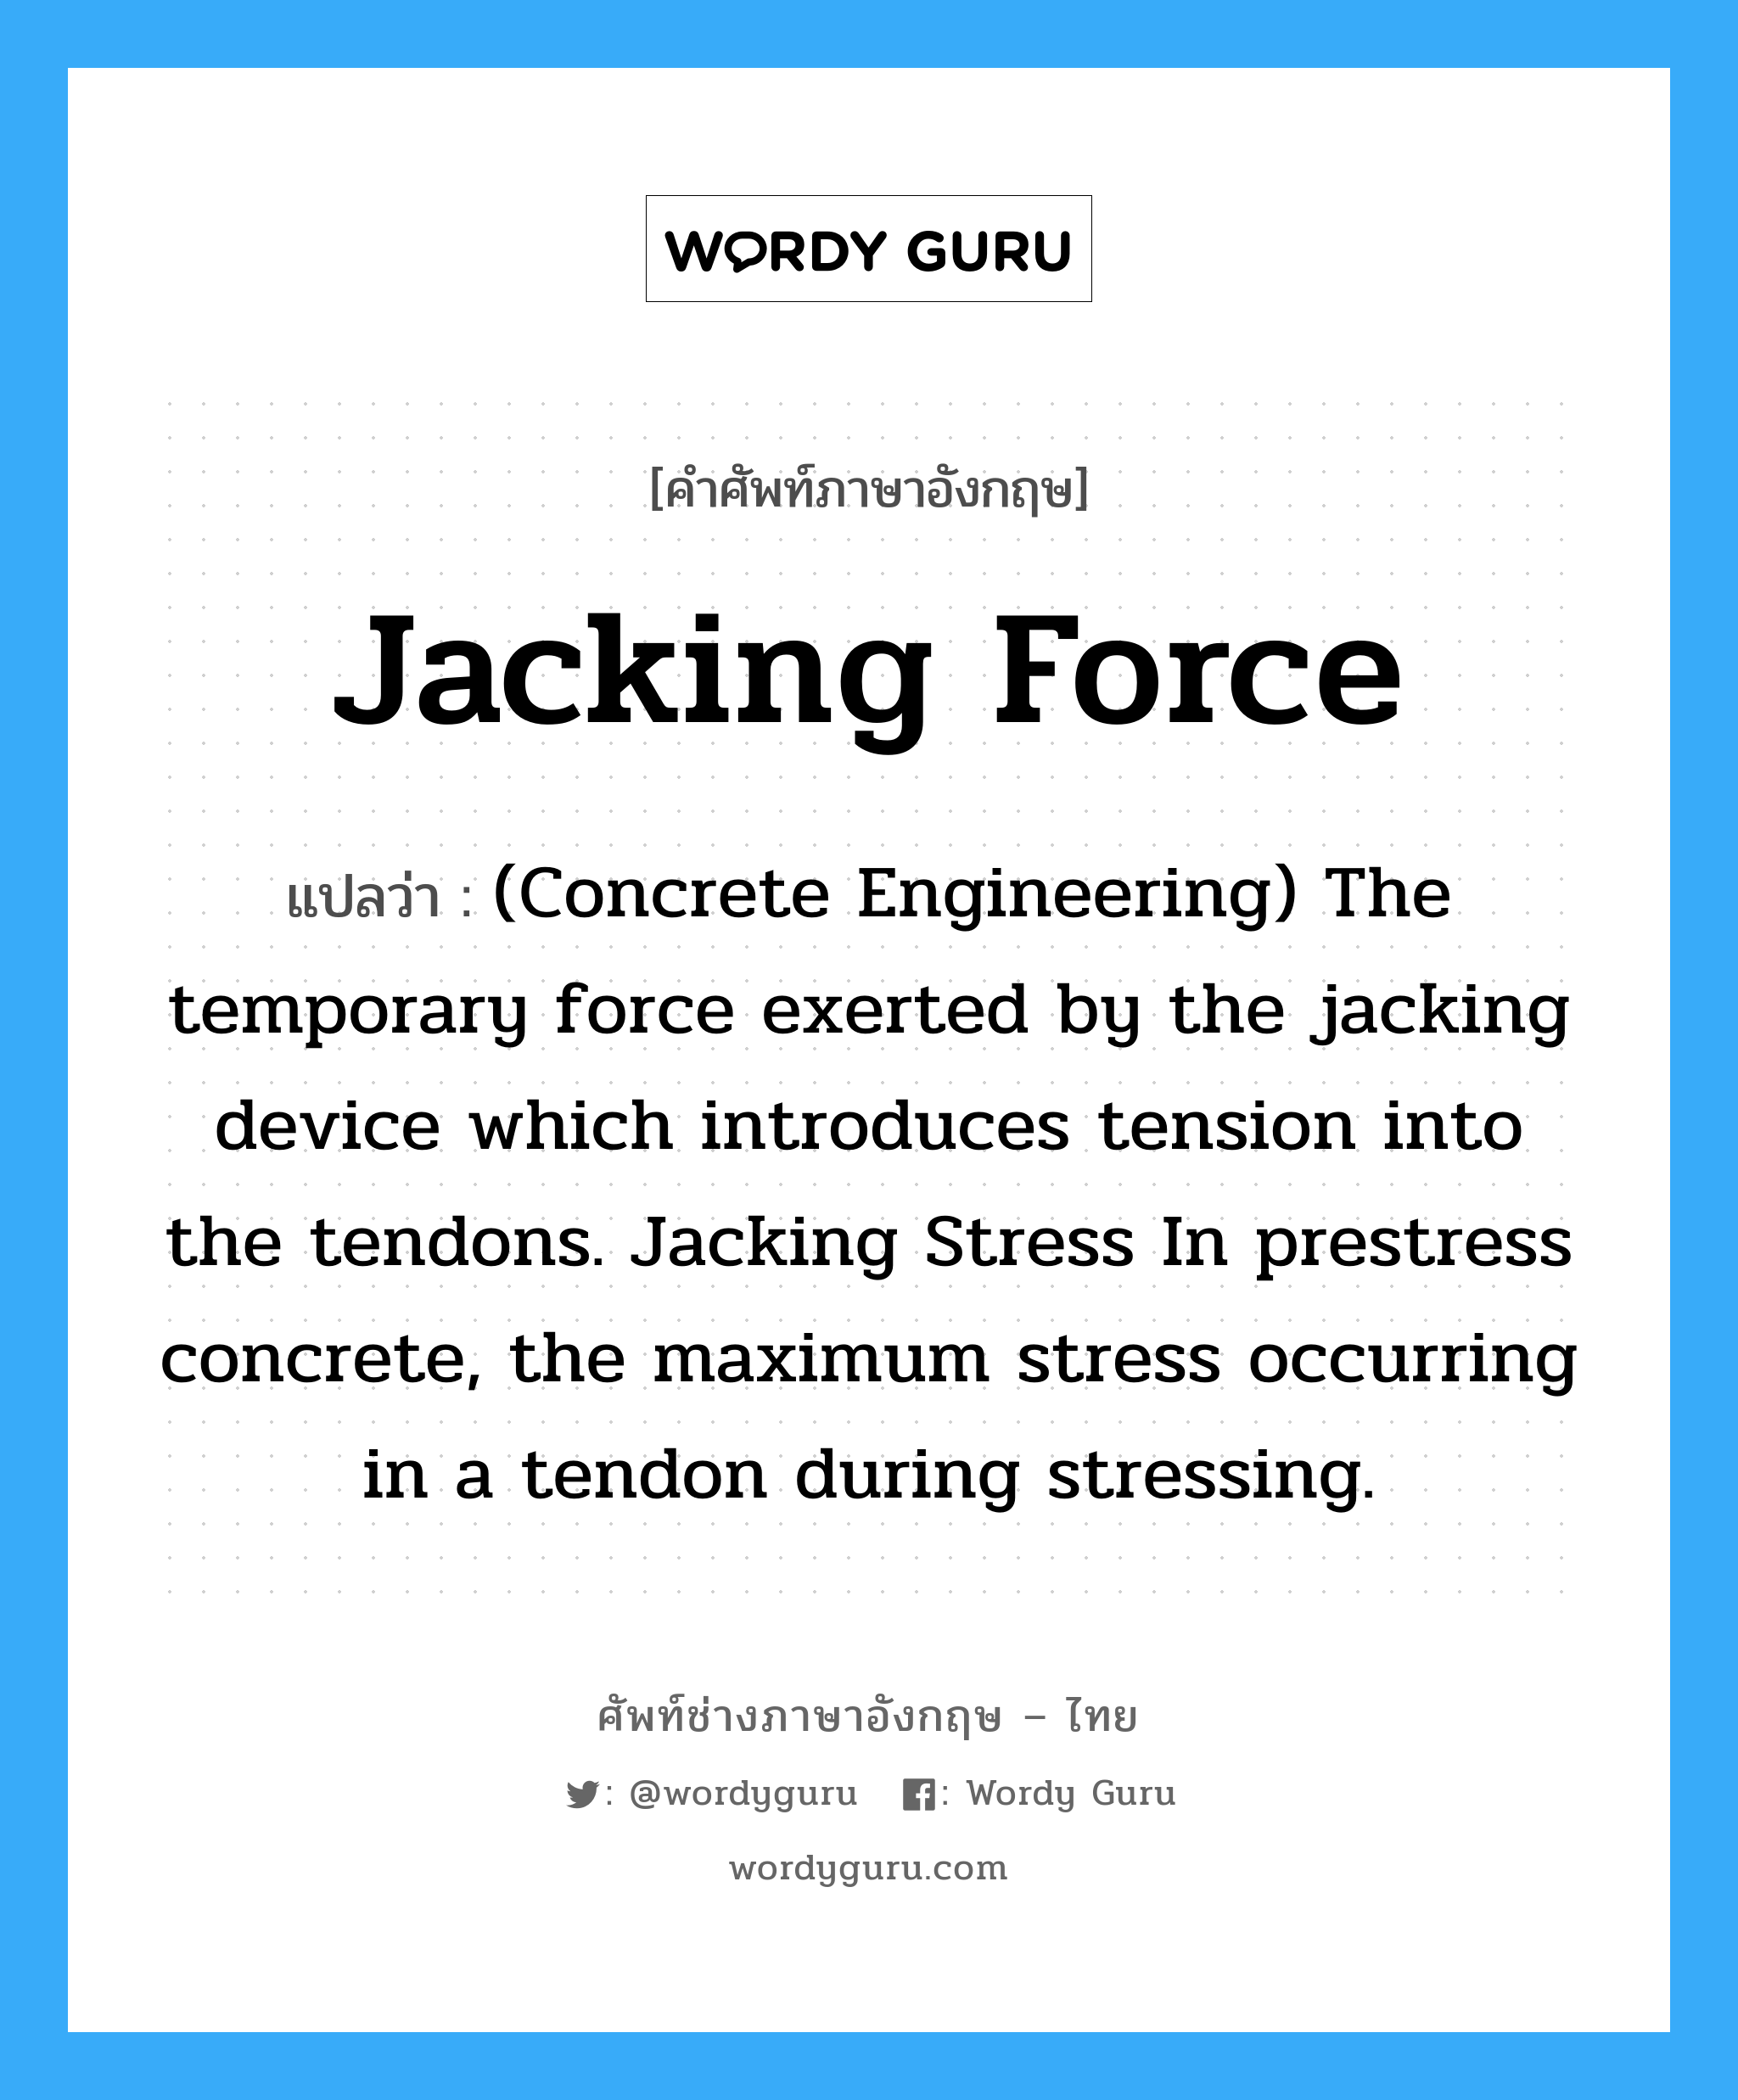 Jacking Force แปลว่า?, คำศัพท์ช่างภาษาอังกฤษ - ไทย Jacking Force คำศัพท์ภาษาอังกฤษ Jacking Force แปลว่า (Concrete Engineering) The temporary force exerted by the jacking device which introduces tension into the tendons. Jacking Stress In prestress concrete, the maximum stress occurring in a tendon during stressing.